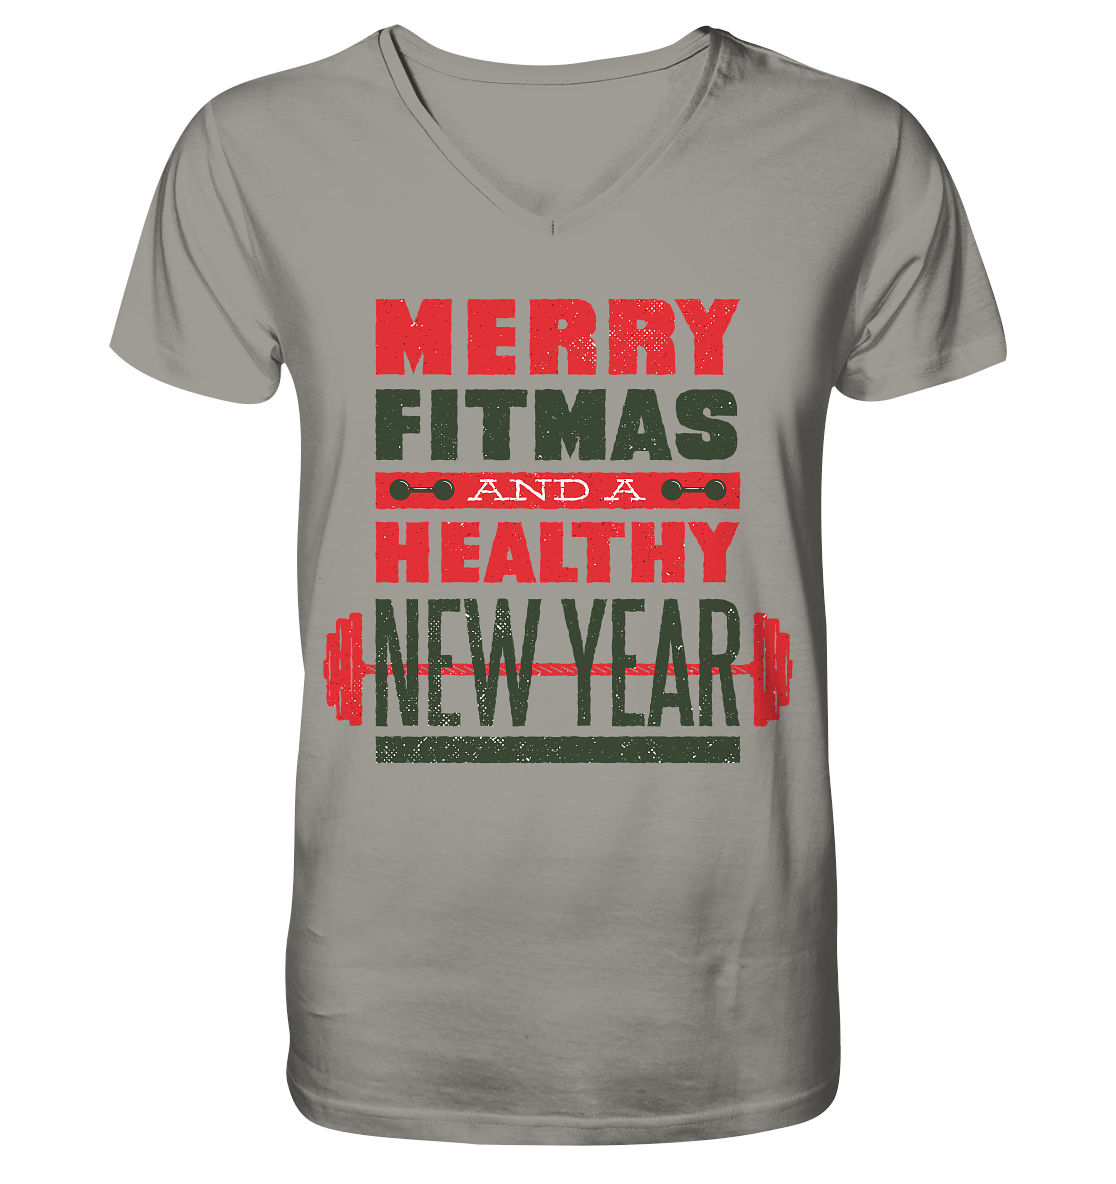 Weihnachtliches Design, Gym, Merry Fitmas and a Healthy New Year - V-Neck Shirt